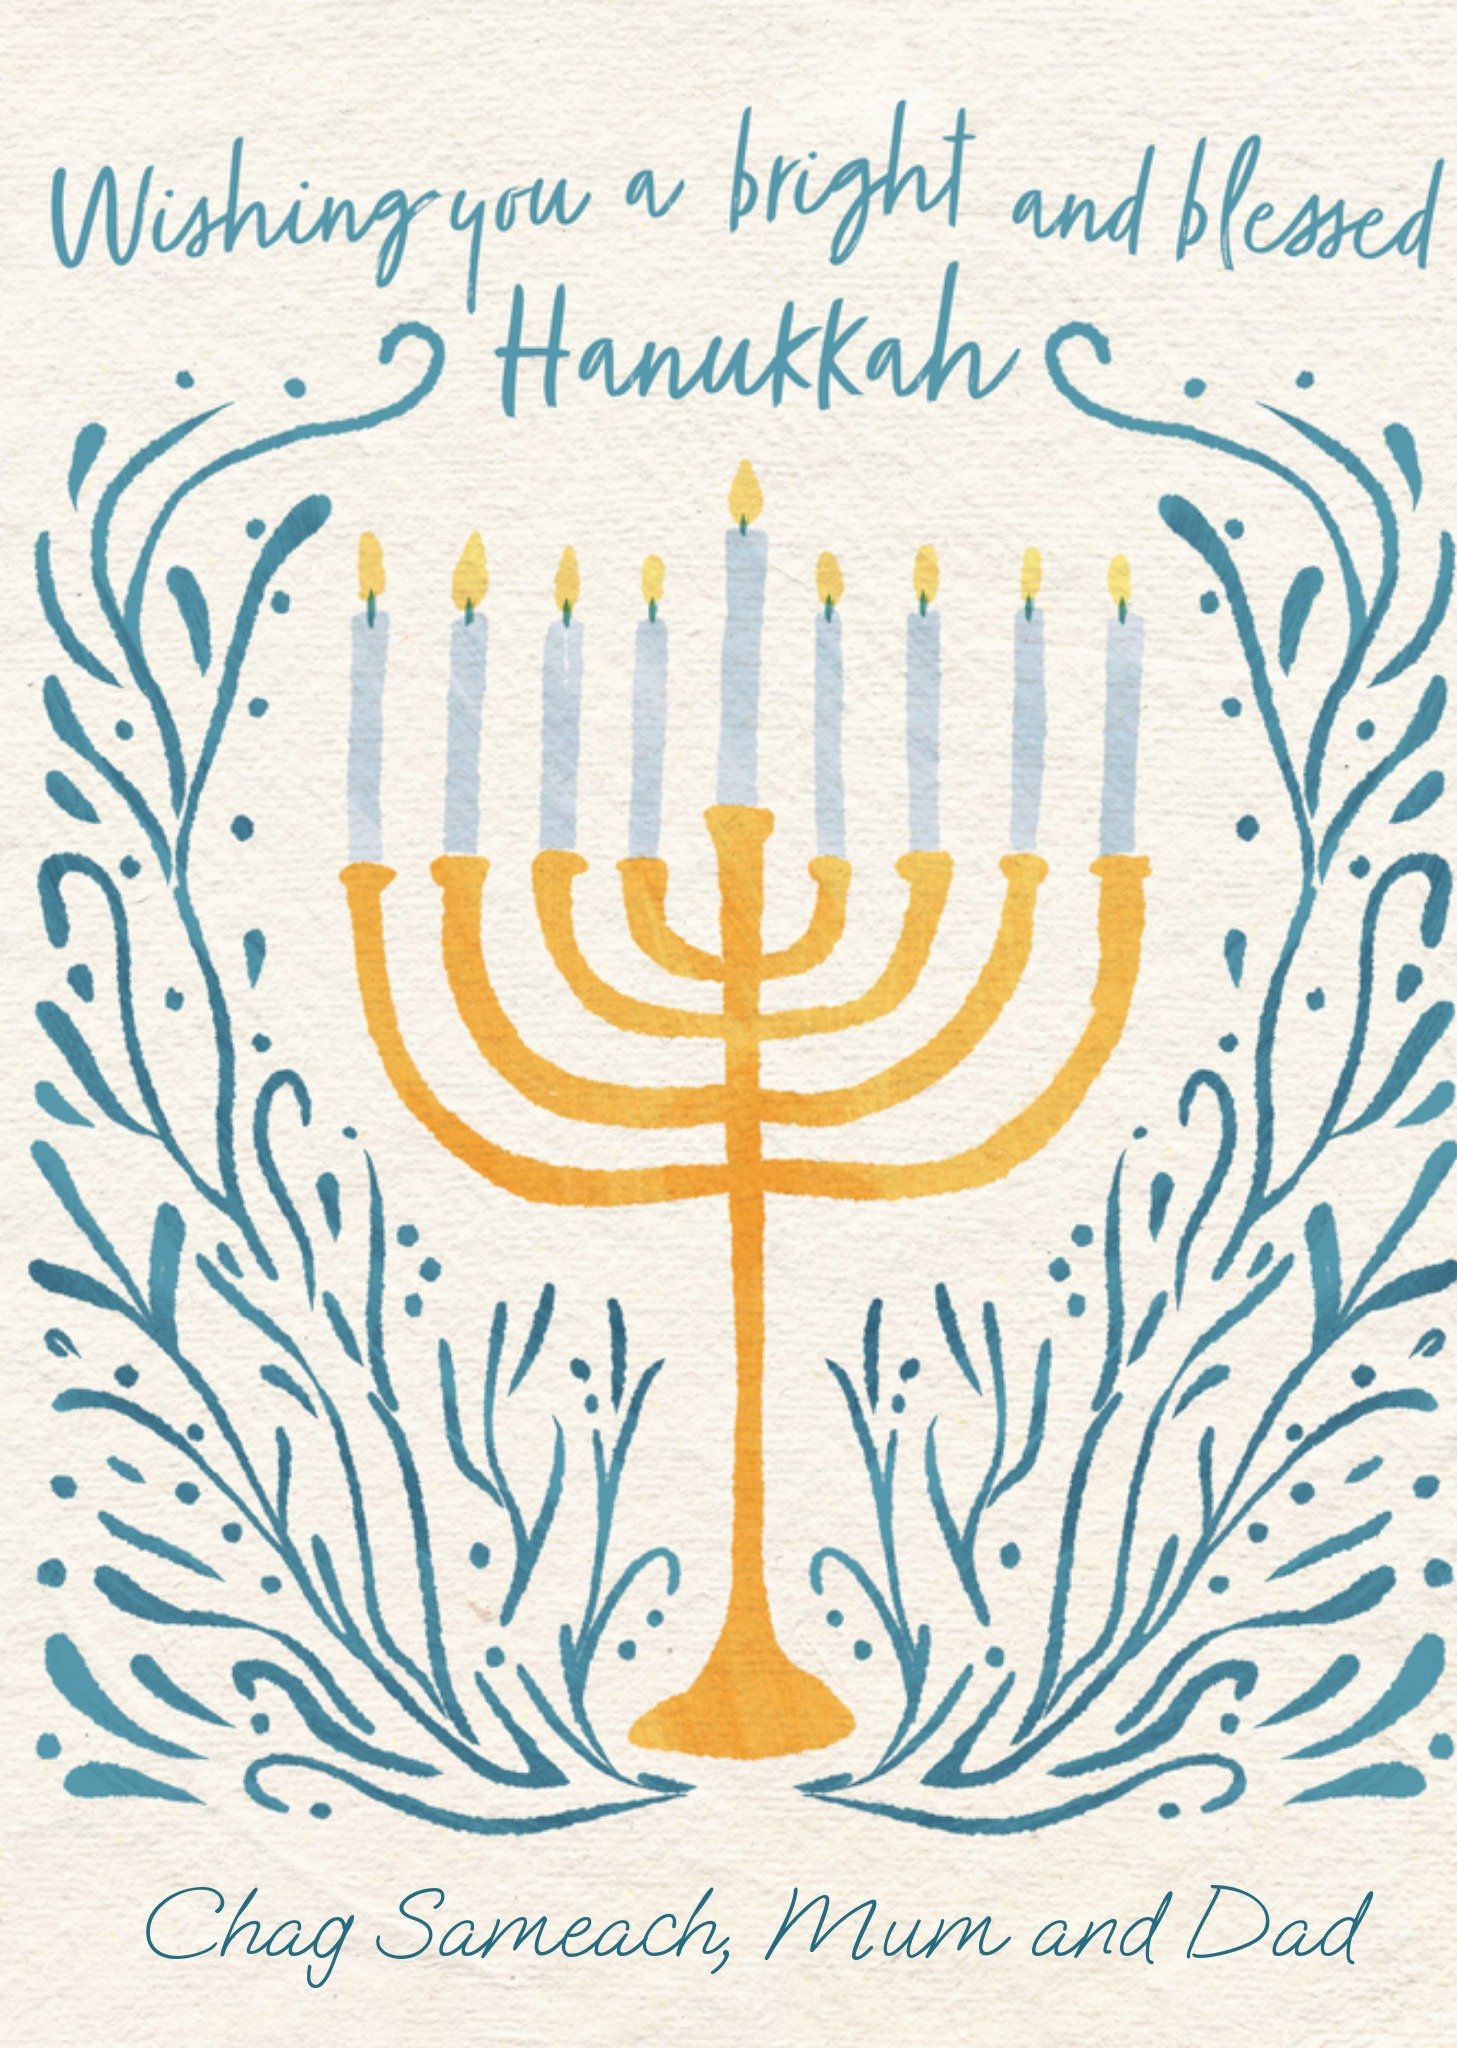 Moonpig Wishing You A Bright And Blessed Hanukkah Card, Large